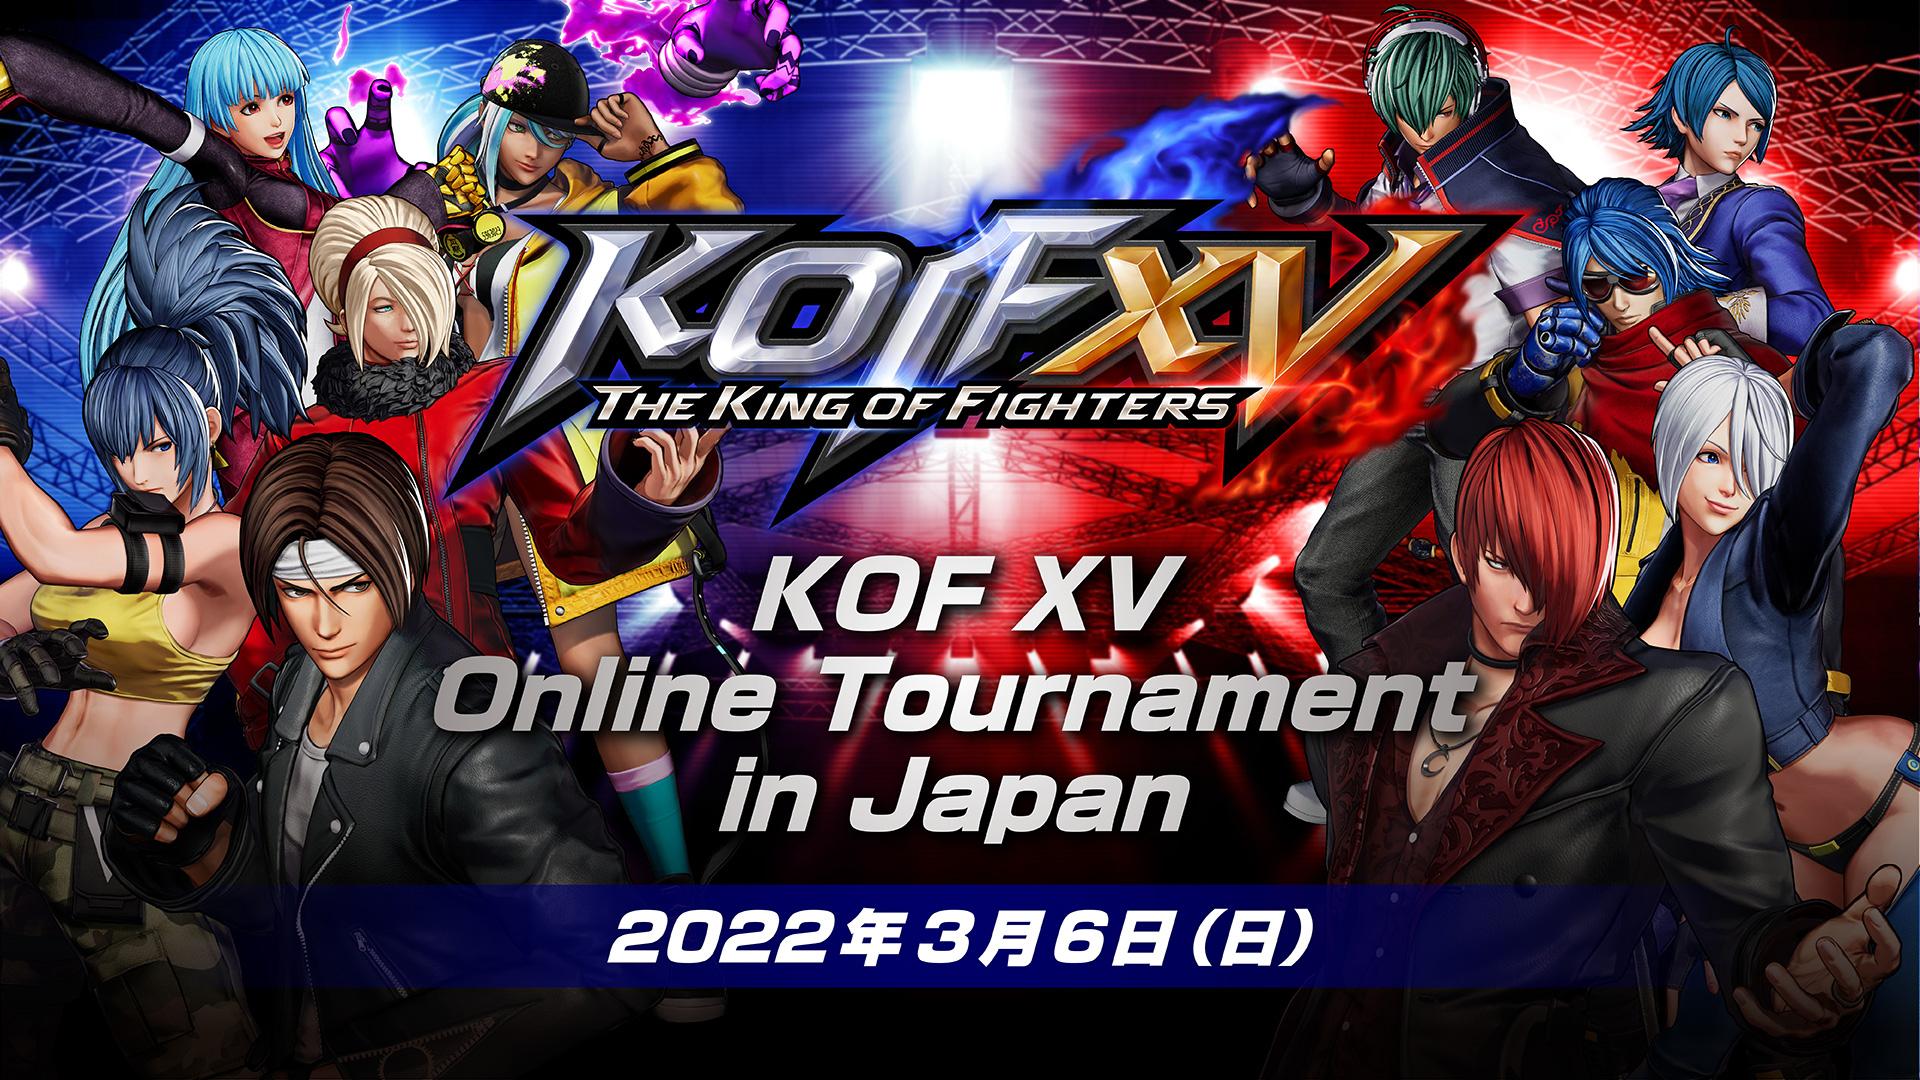 KOF XV Online Tournament in Japan feature image